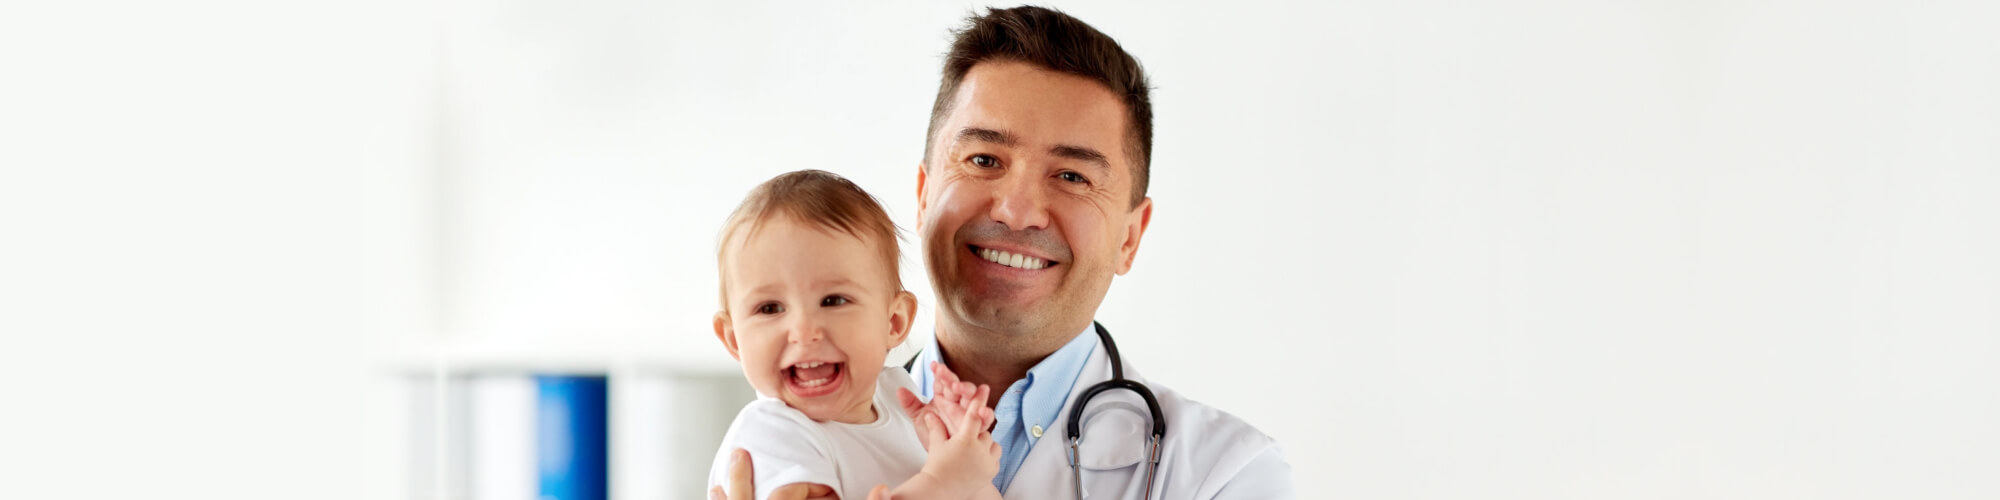 doctor holding a baby